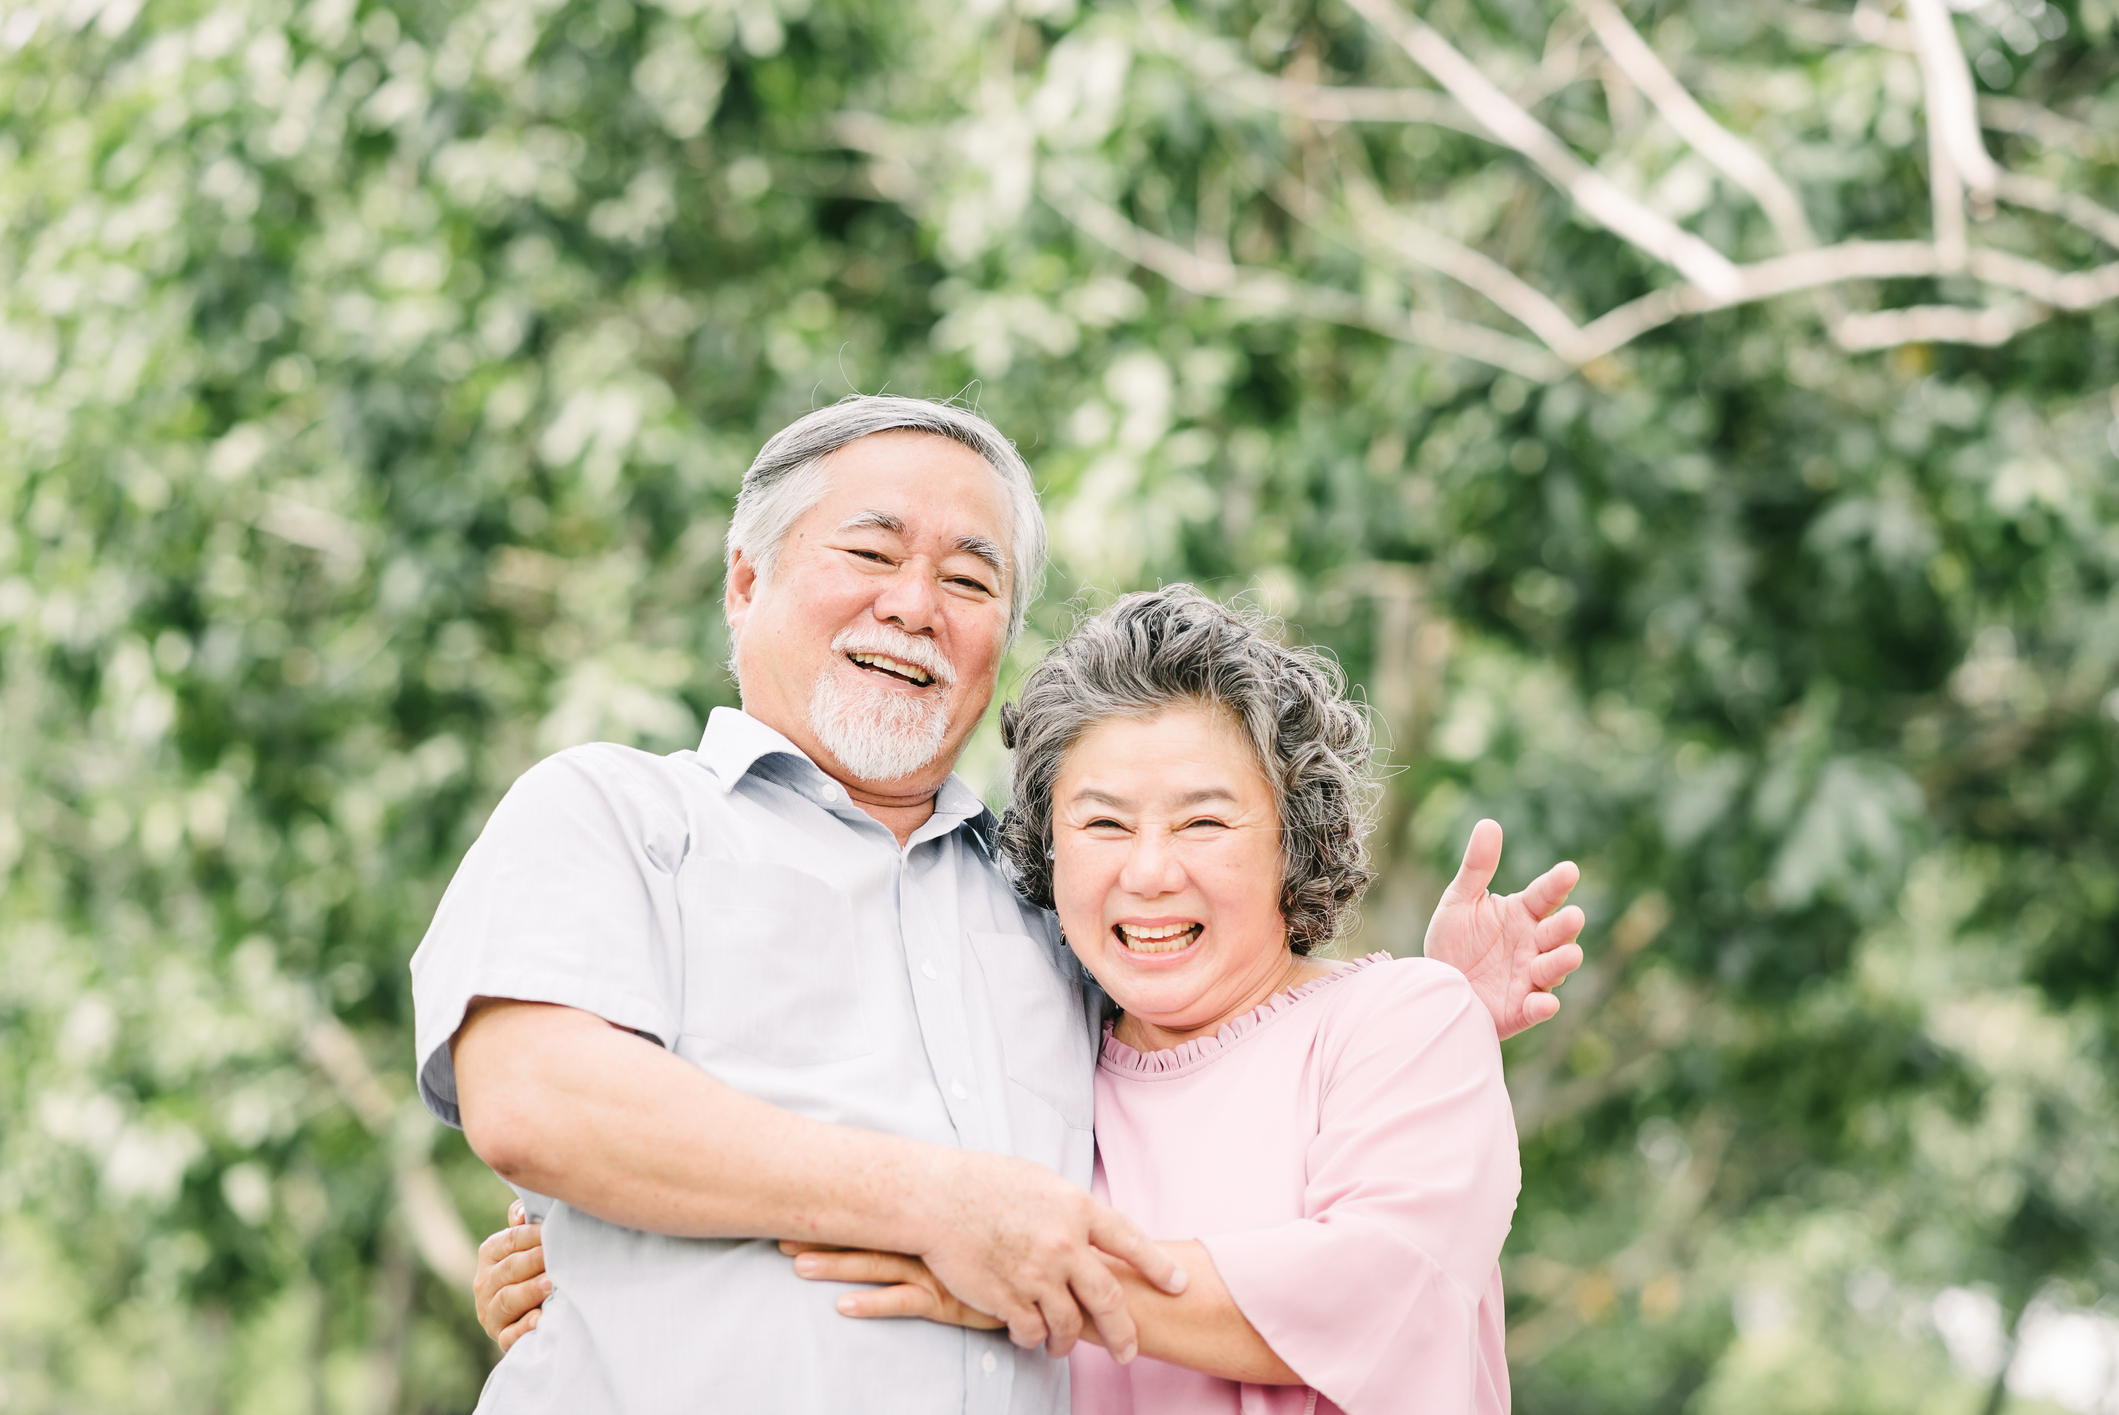 Happy Asian senior couple having a good time. They laughing and smiling while holding each other outdoor in the park.